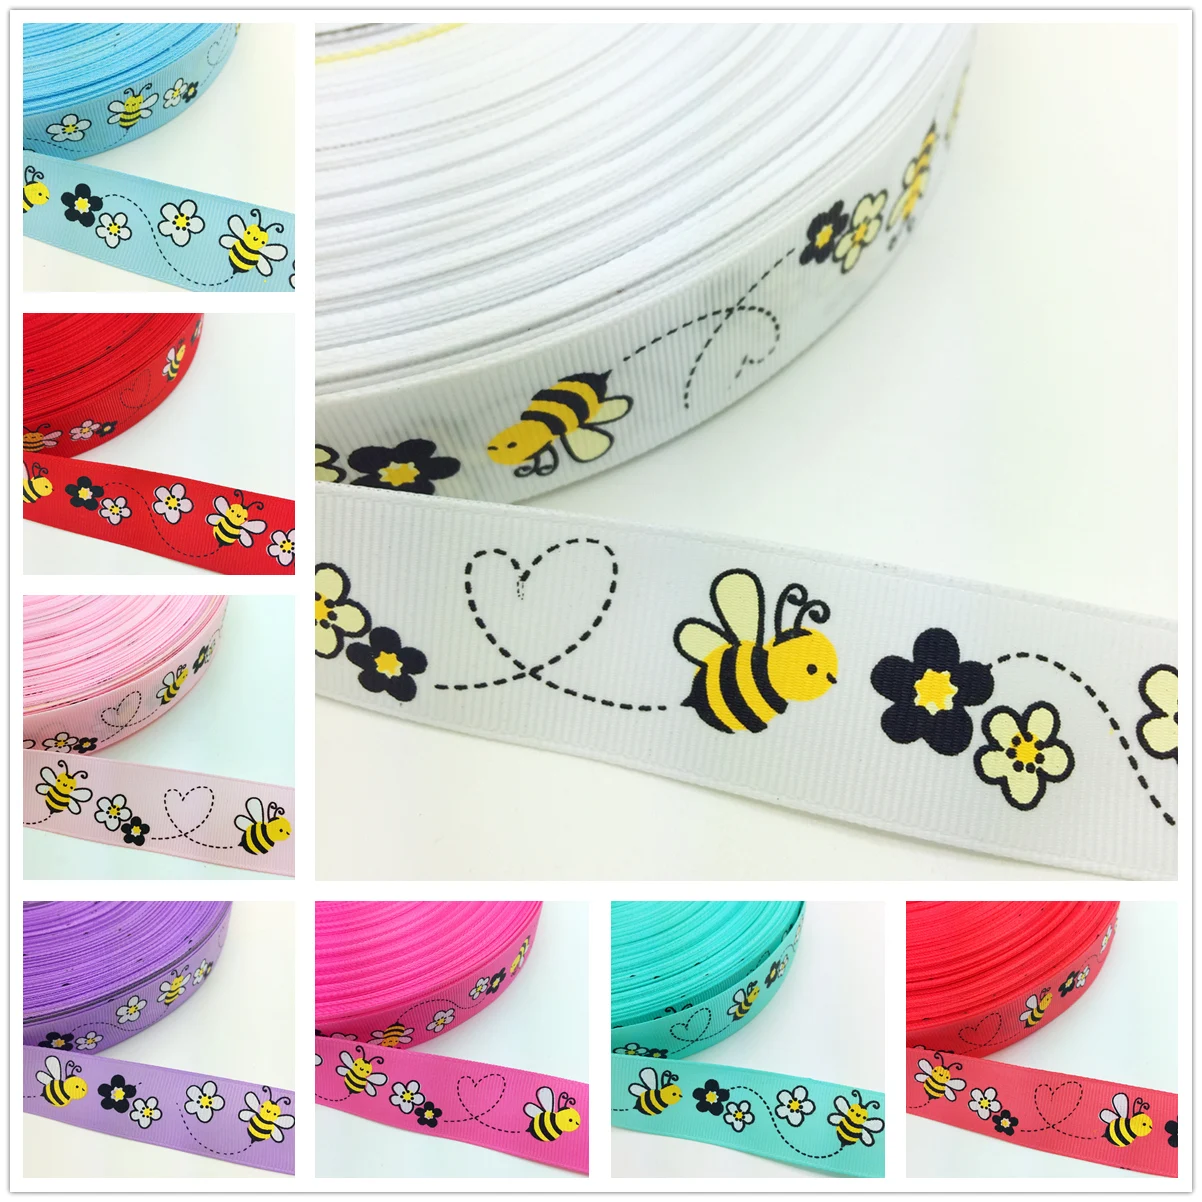 aliexpress.com - NEW DIY 5 Yards 1” 25mm Little Bee Printed Grosgrain Ribbon Hair Bow Party Craft